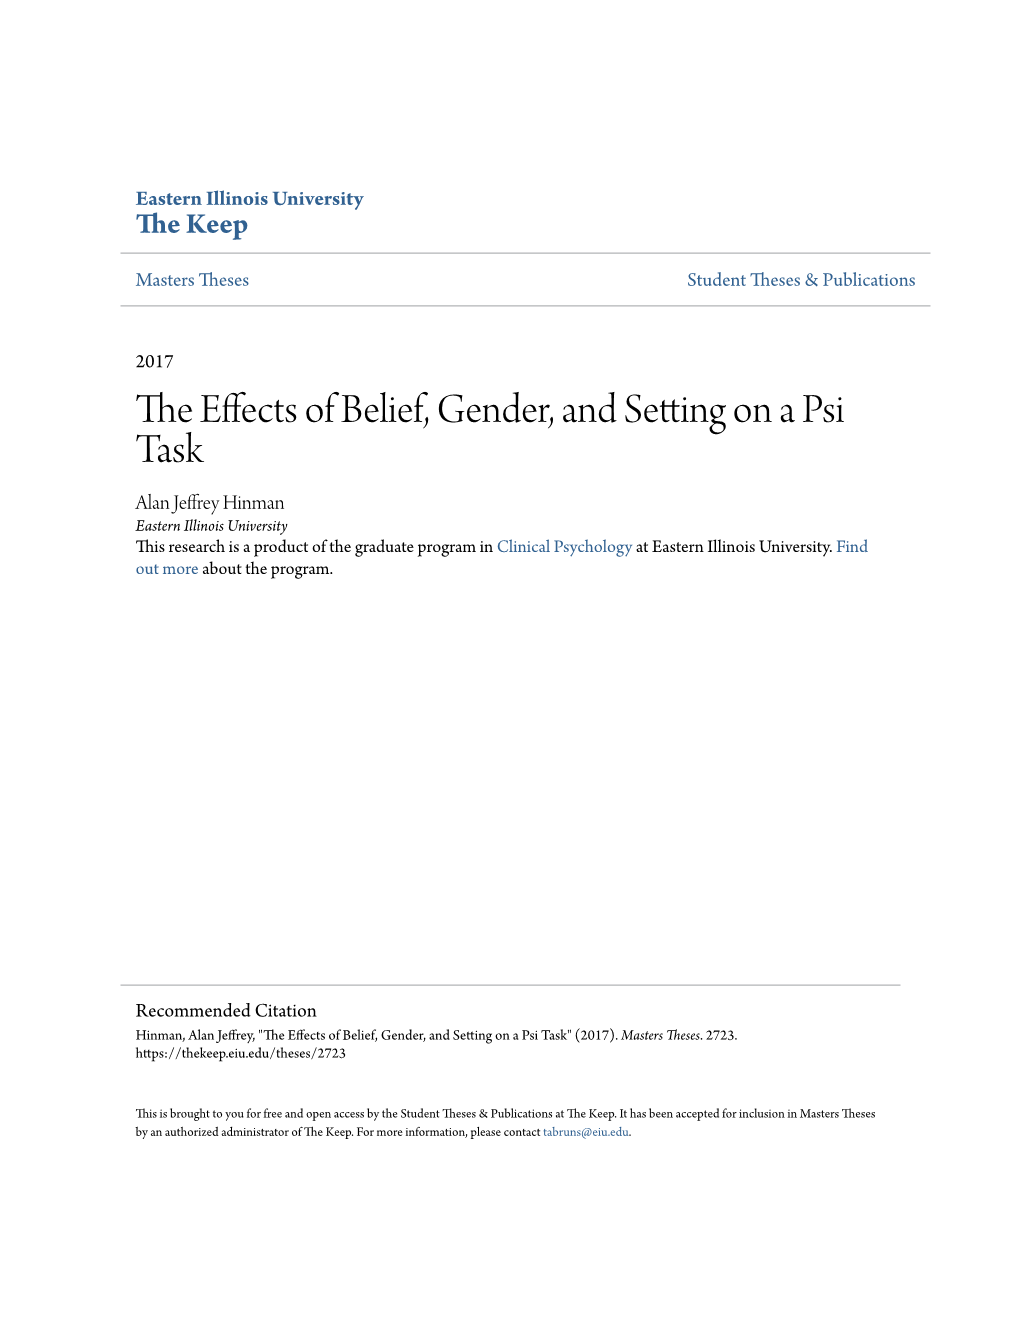 The Effects of Belief, Gender, and Setting on a Psi Task" (2017)